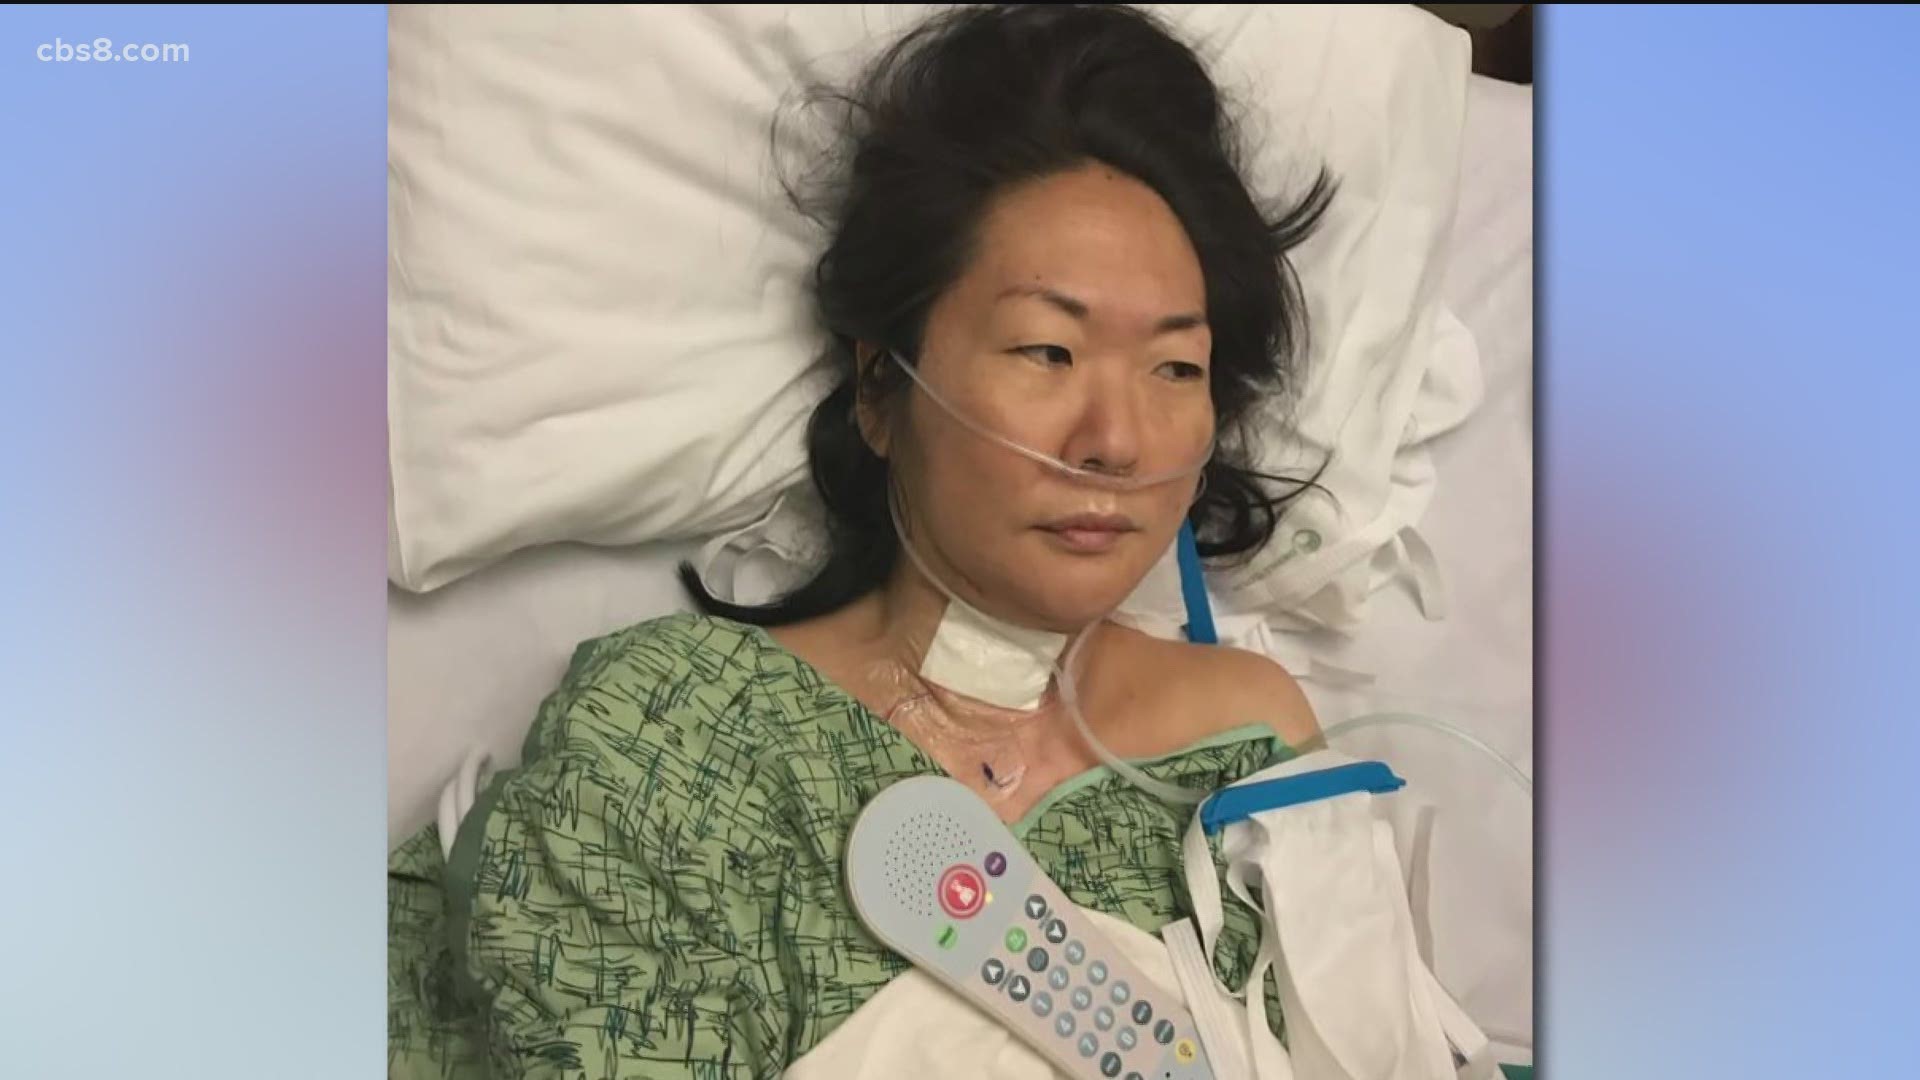 One Southern California woman's procedure is being postponed since COVID-19 is taking over hospital capacity.